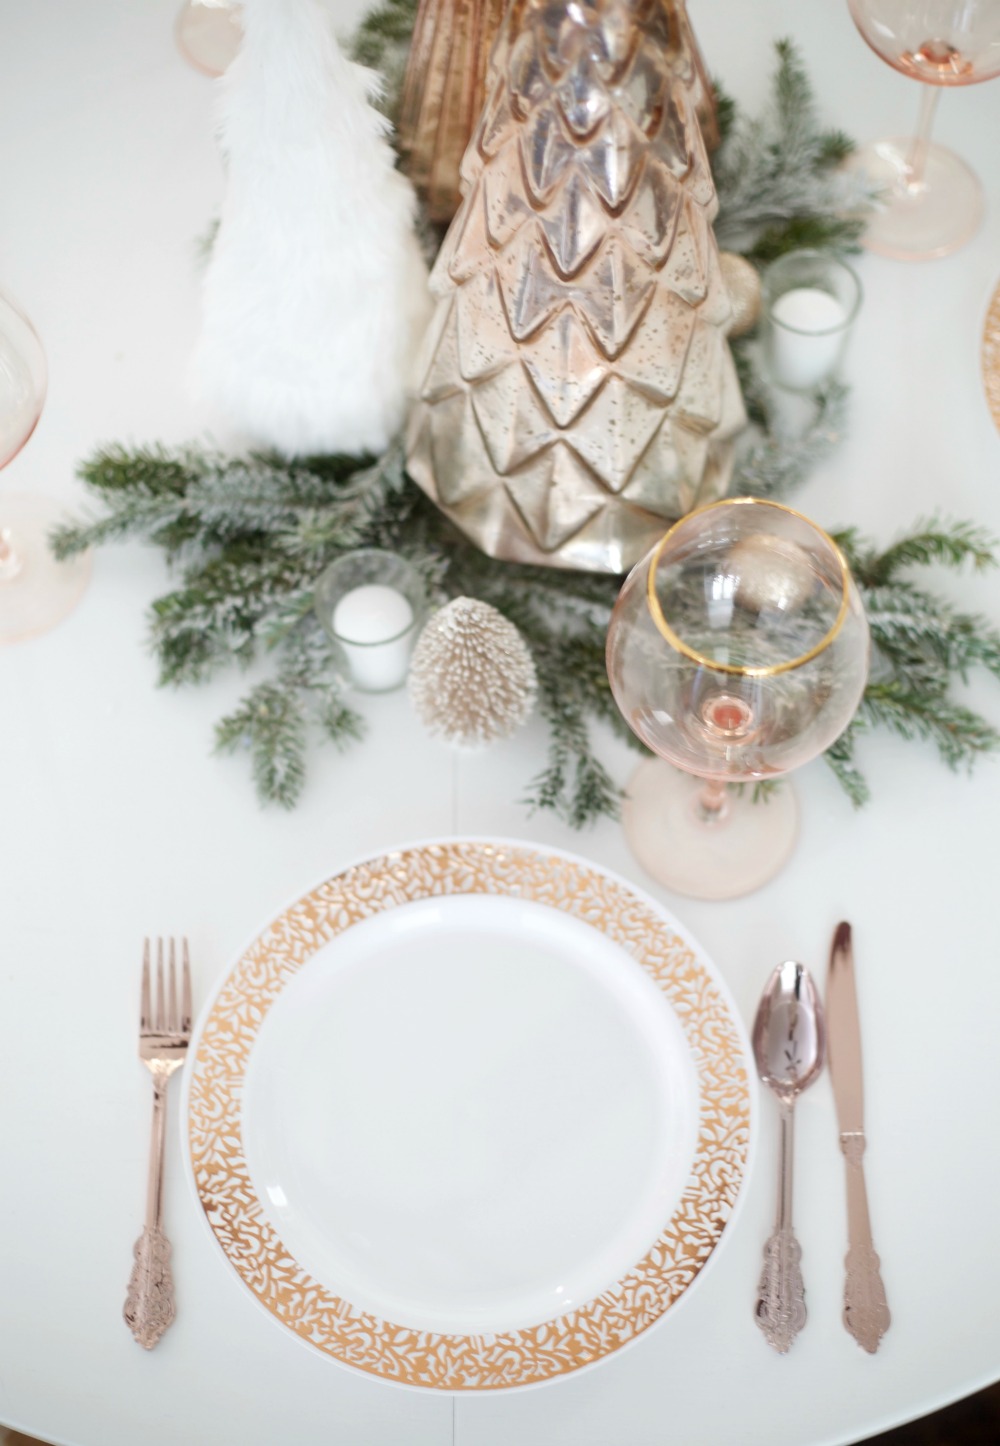 Rose Gold Tablesetting | Rose Gold Placesetting | Christmas Tablesetting | Parties for Pennies